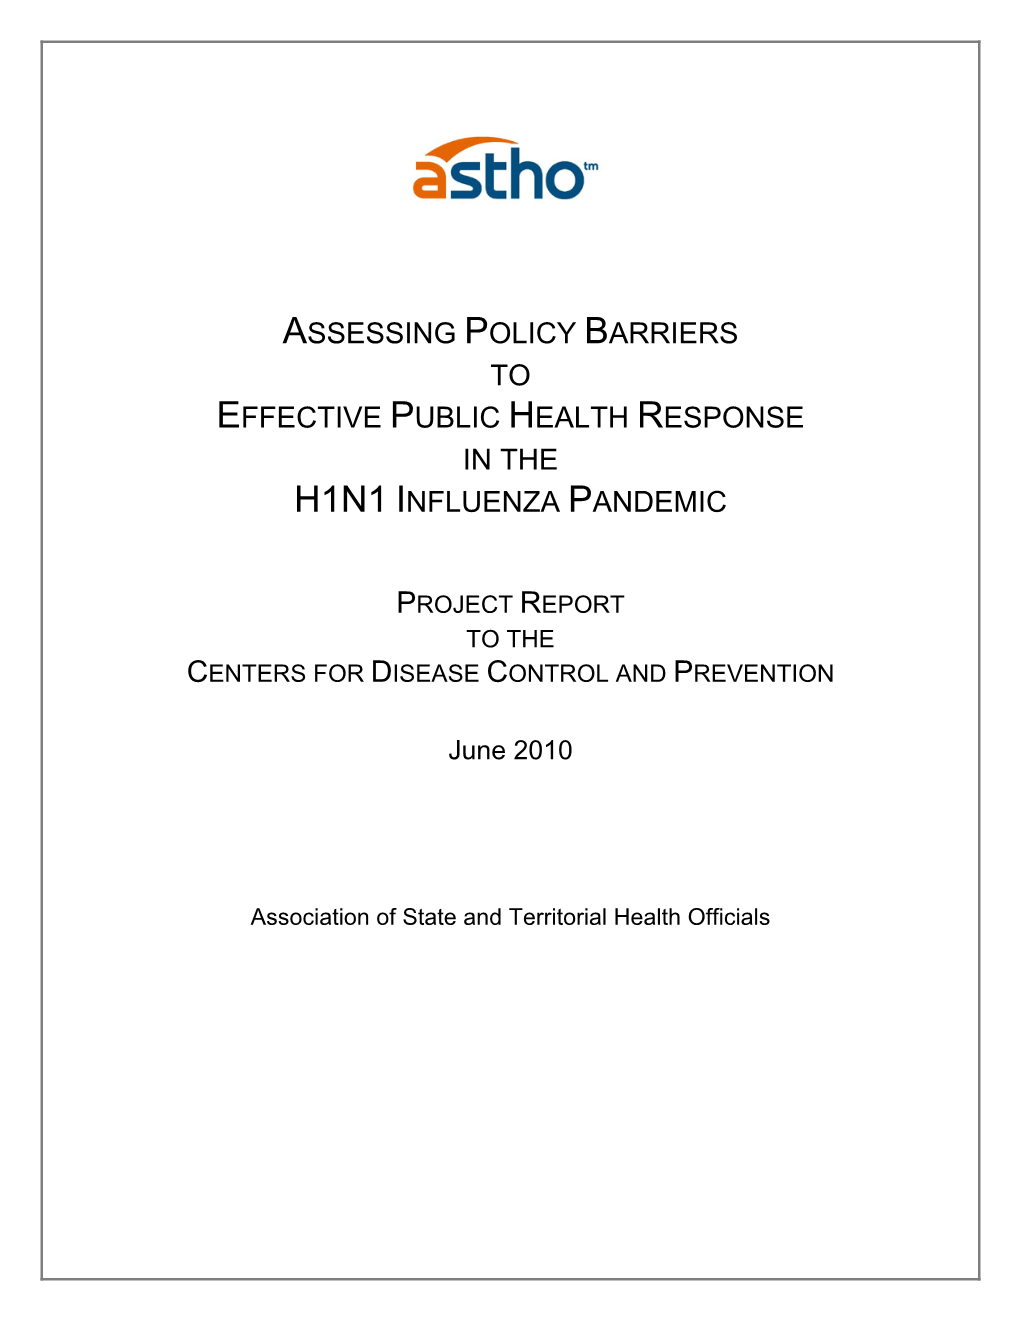 Assessing Policy Barriers to Effective Public Health Response in the H1n1 Influenza Pandemic